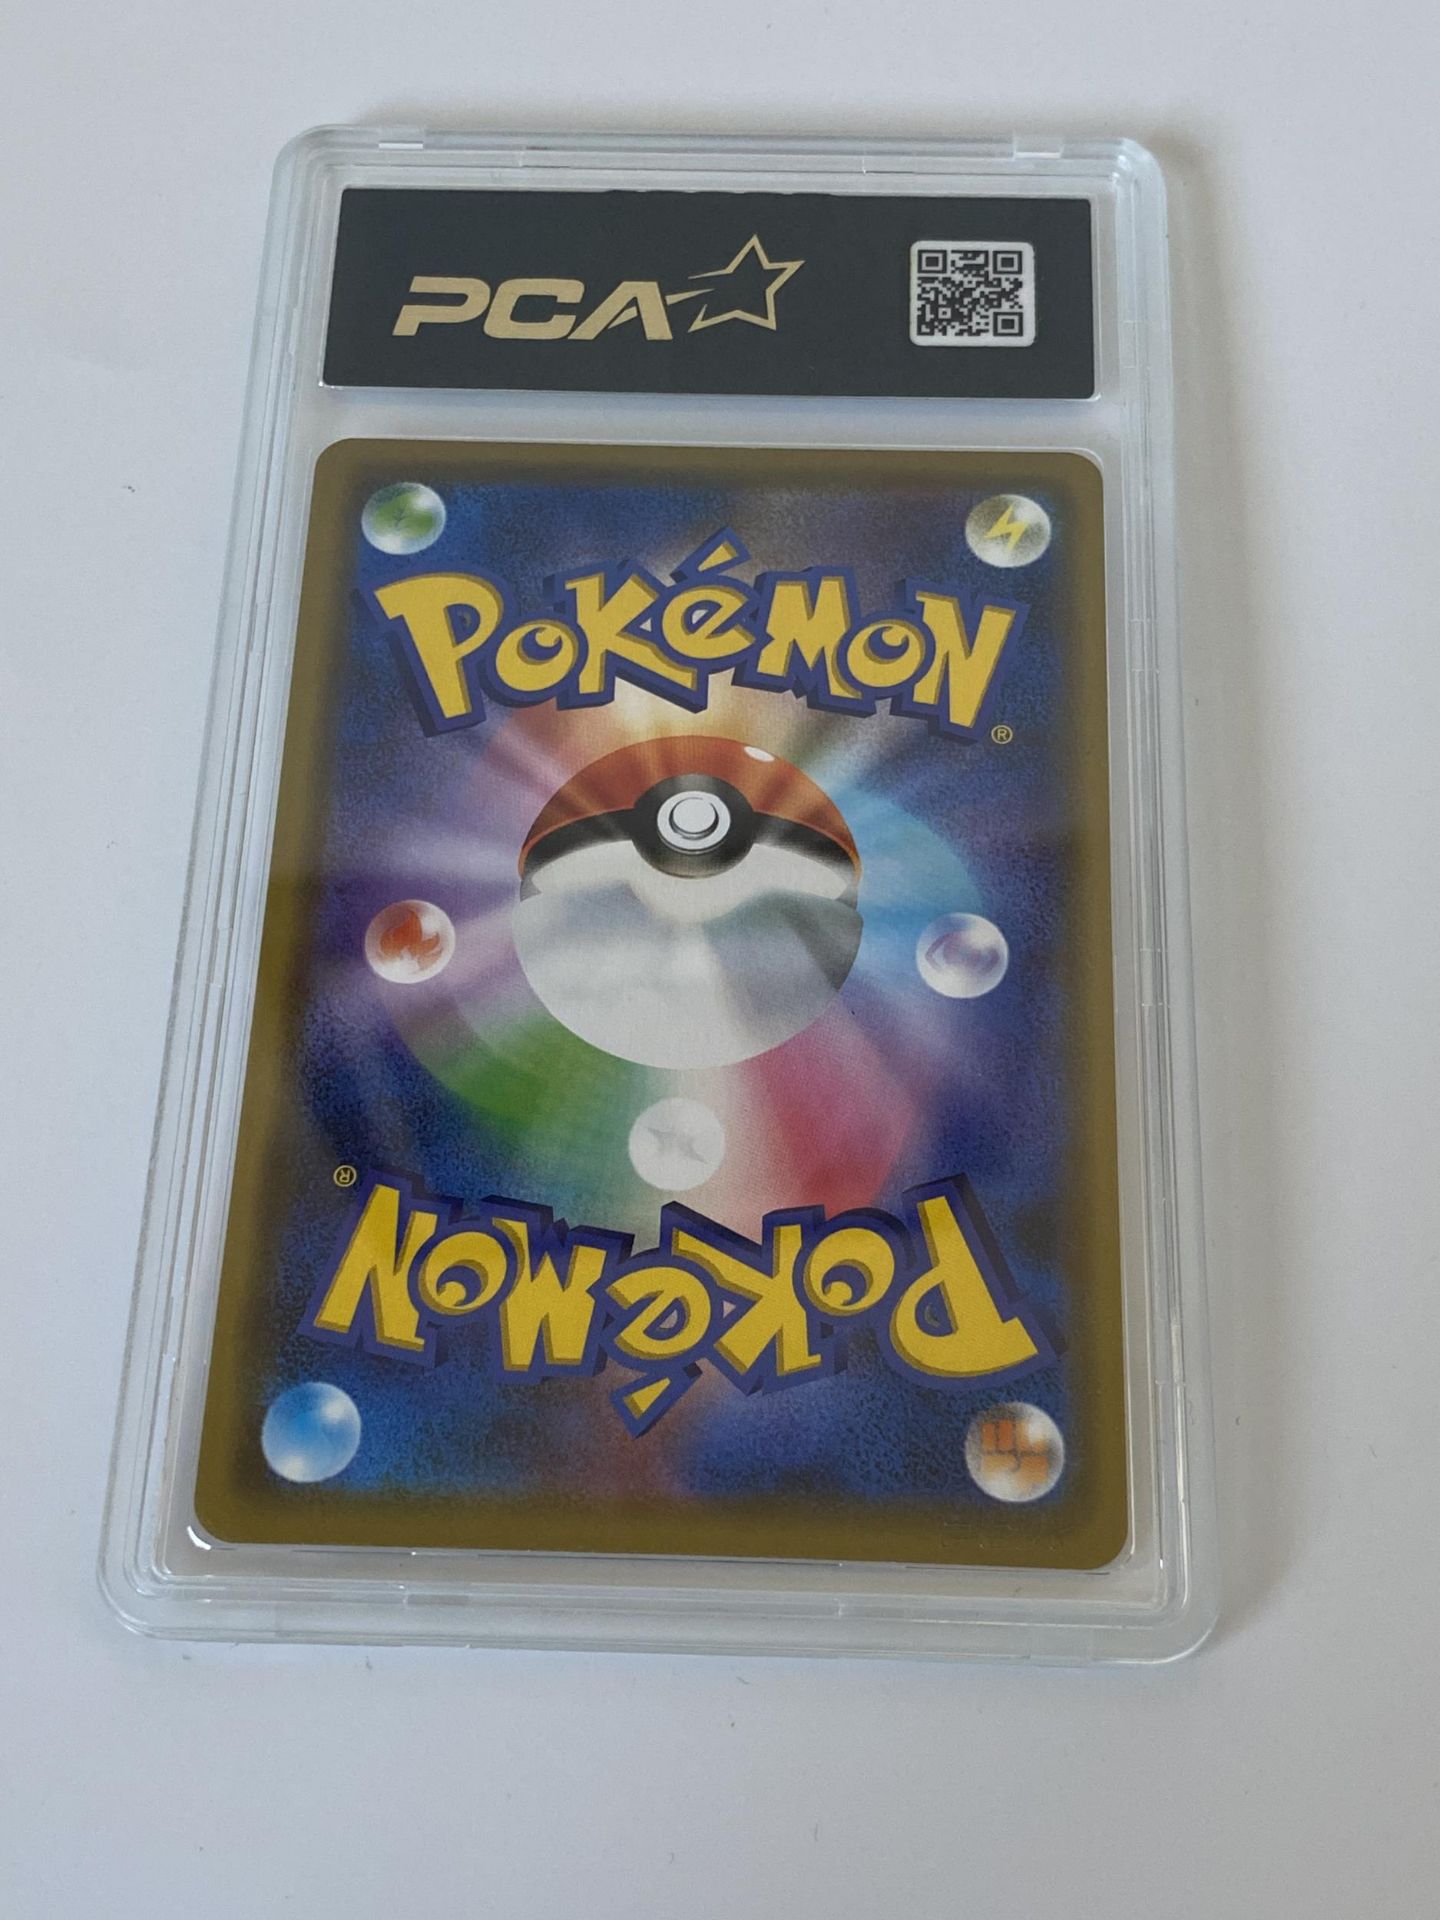 A JAPANESE GRADED POKEMON CARD -MEW 055/173 TAG ALL STARS - PCA GRADE - 9.5 - Image 3 of 3